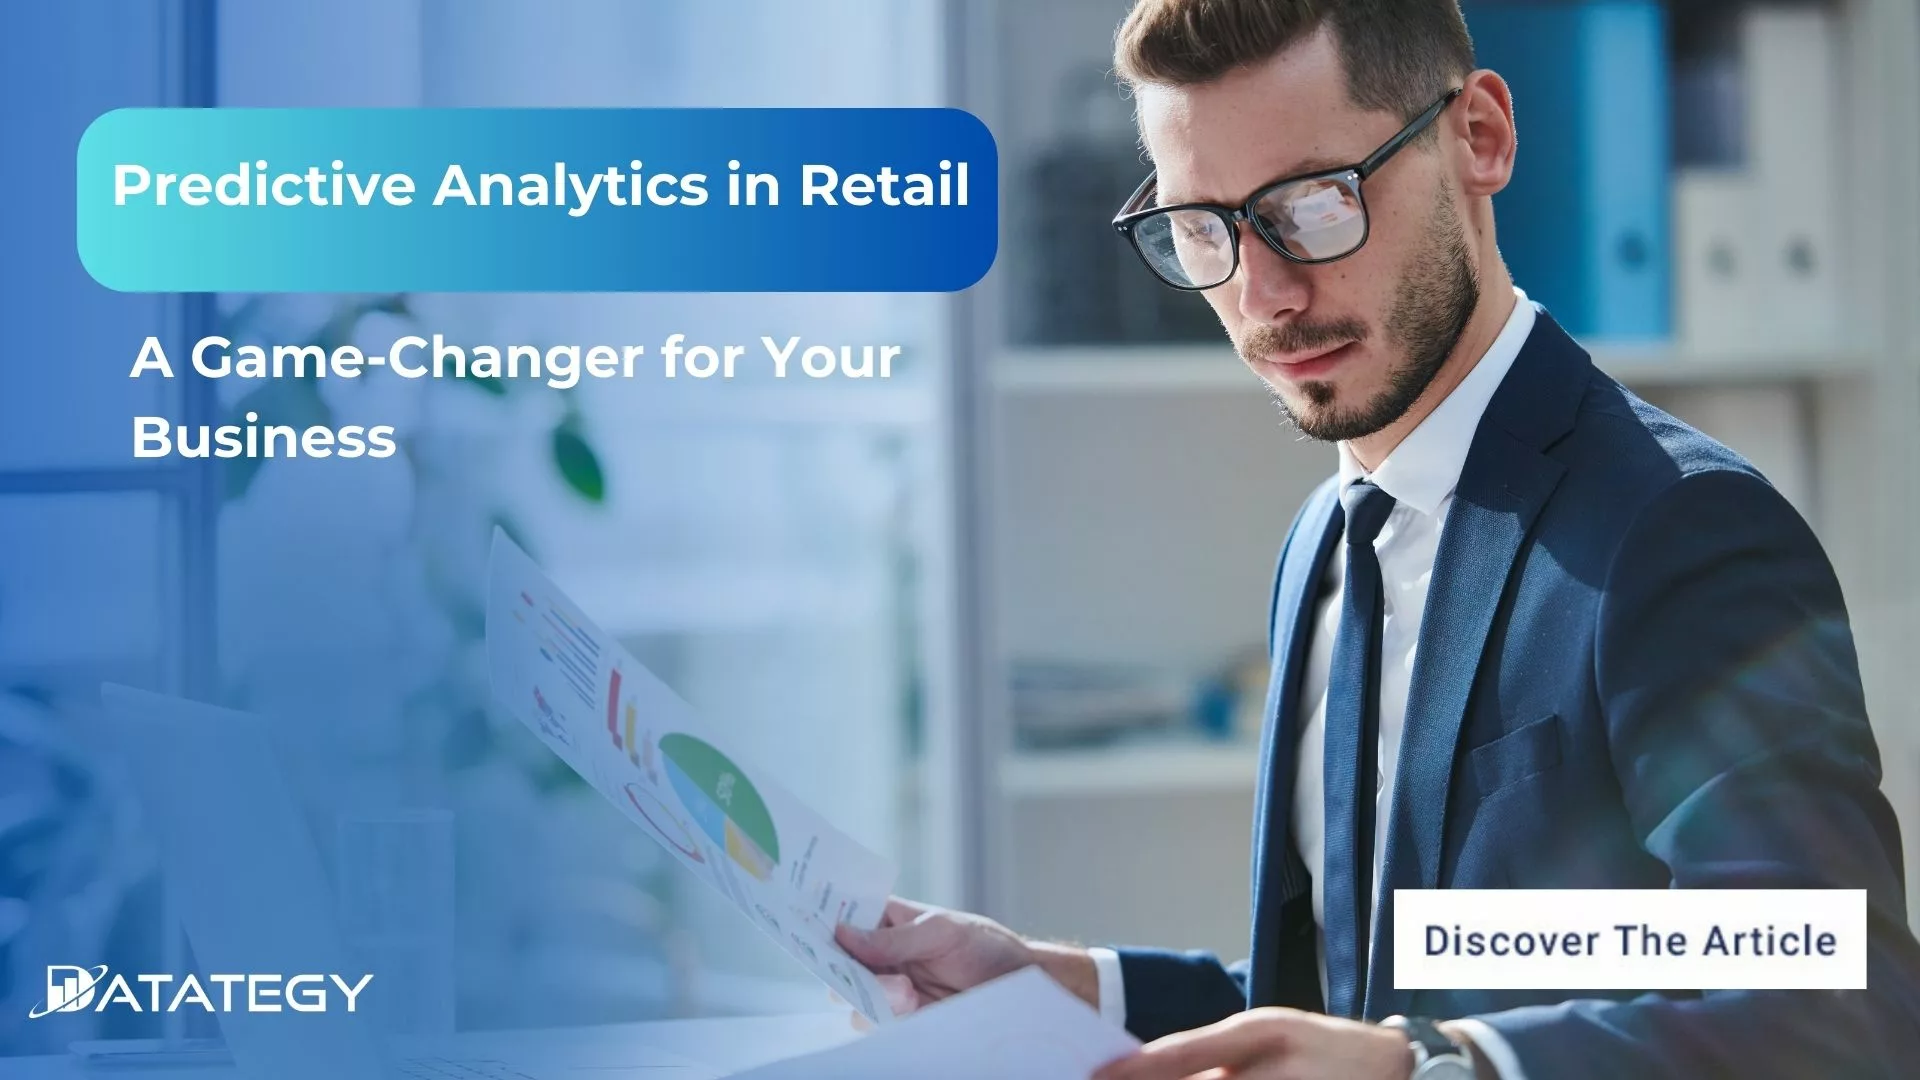 Predictive Analytics in Retail: A Game-Changer for Your Business